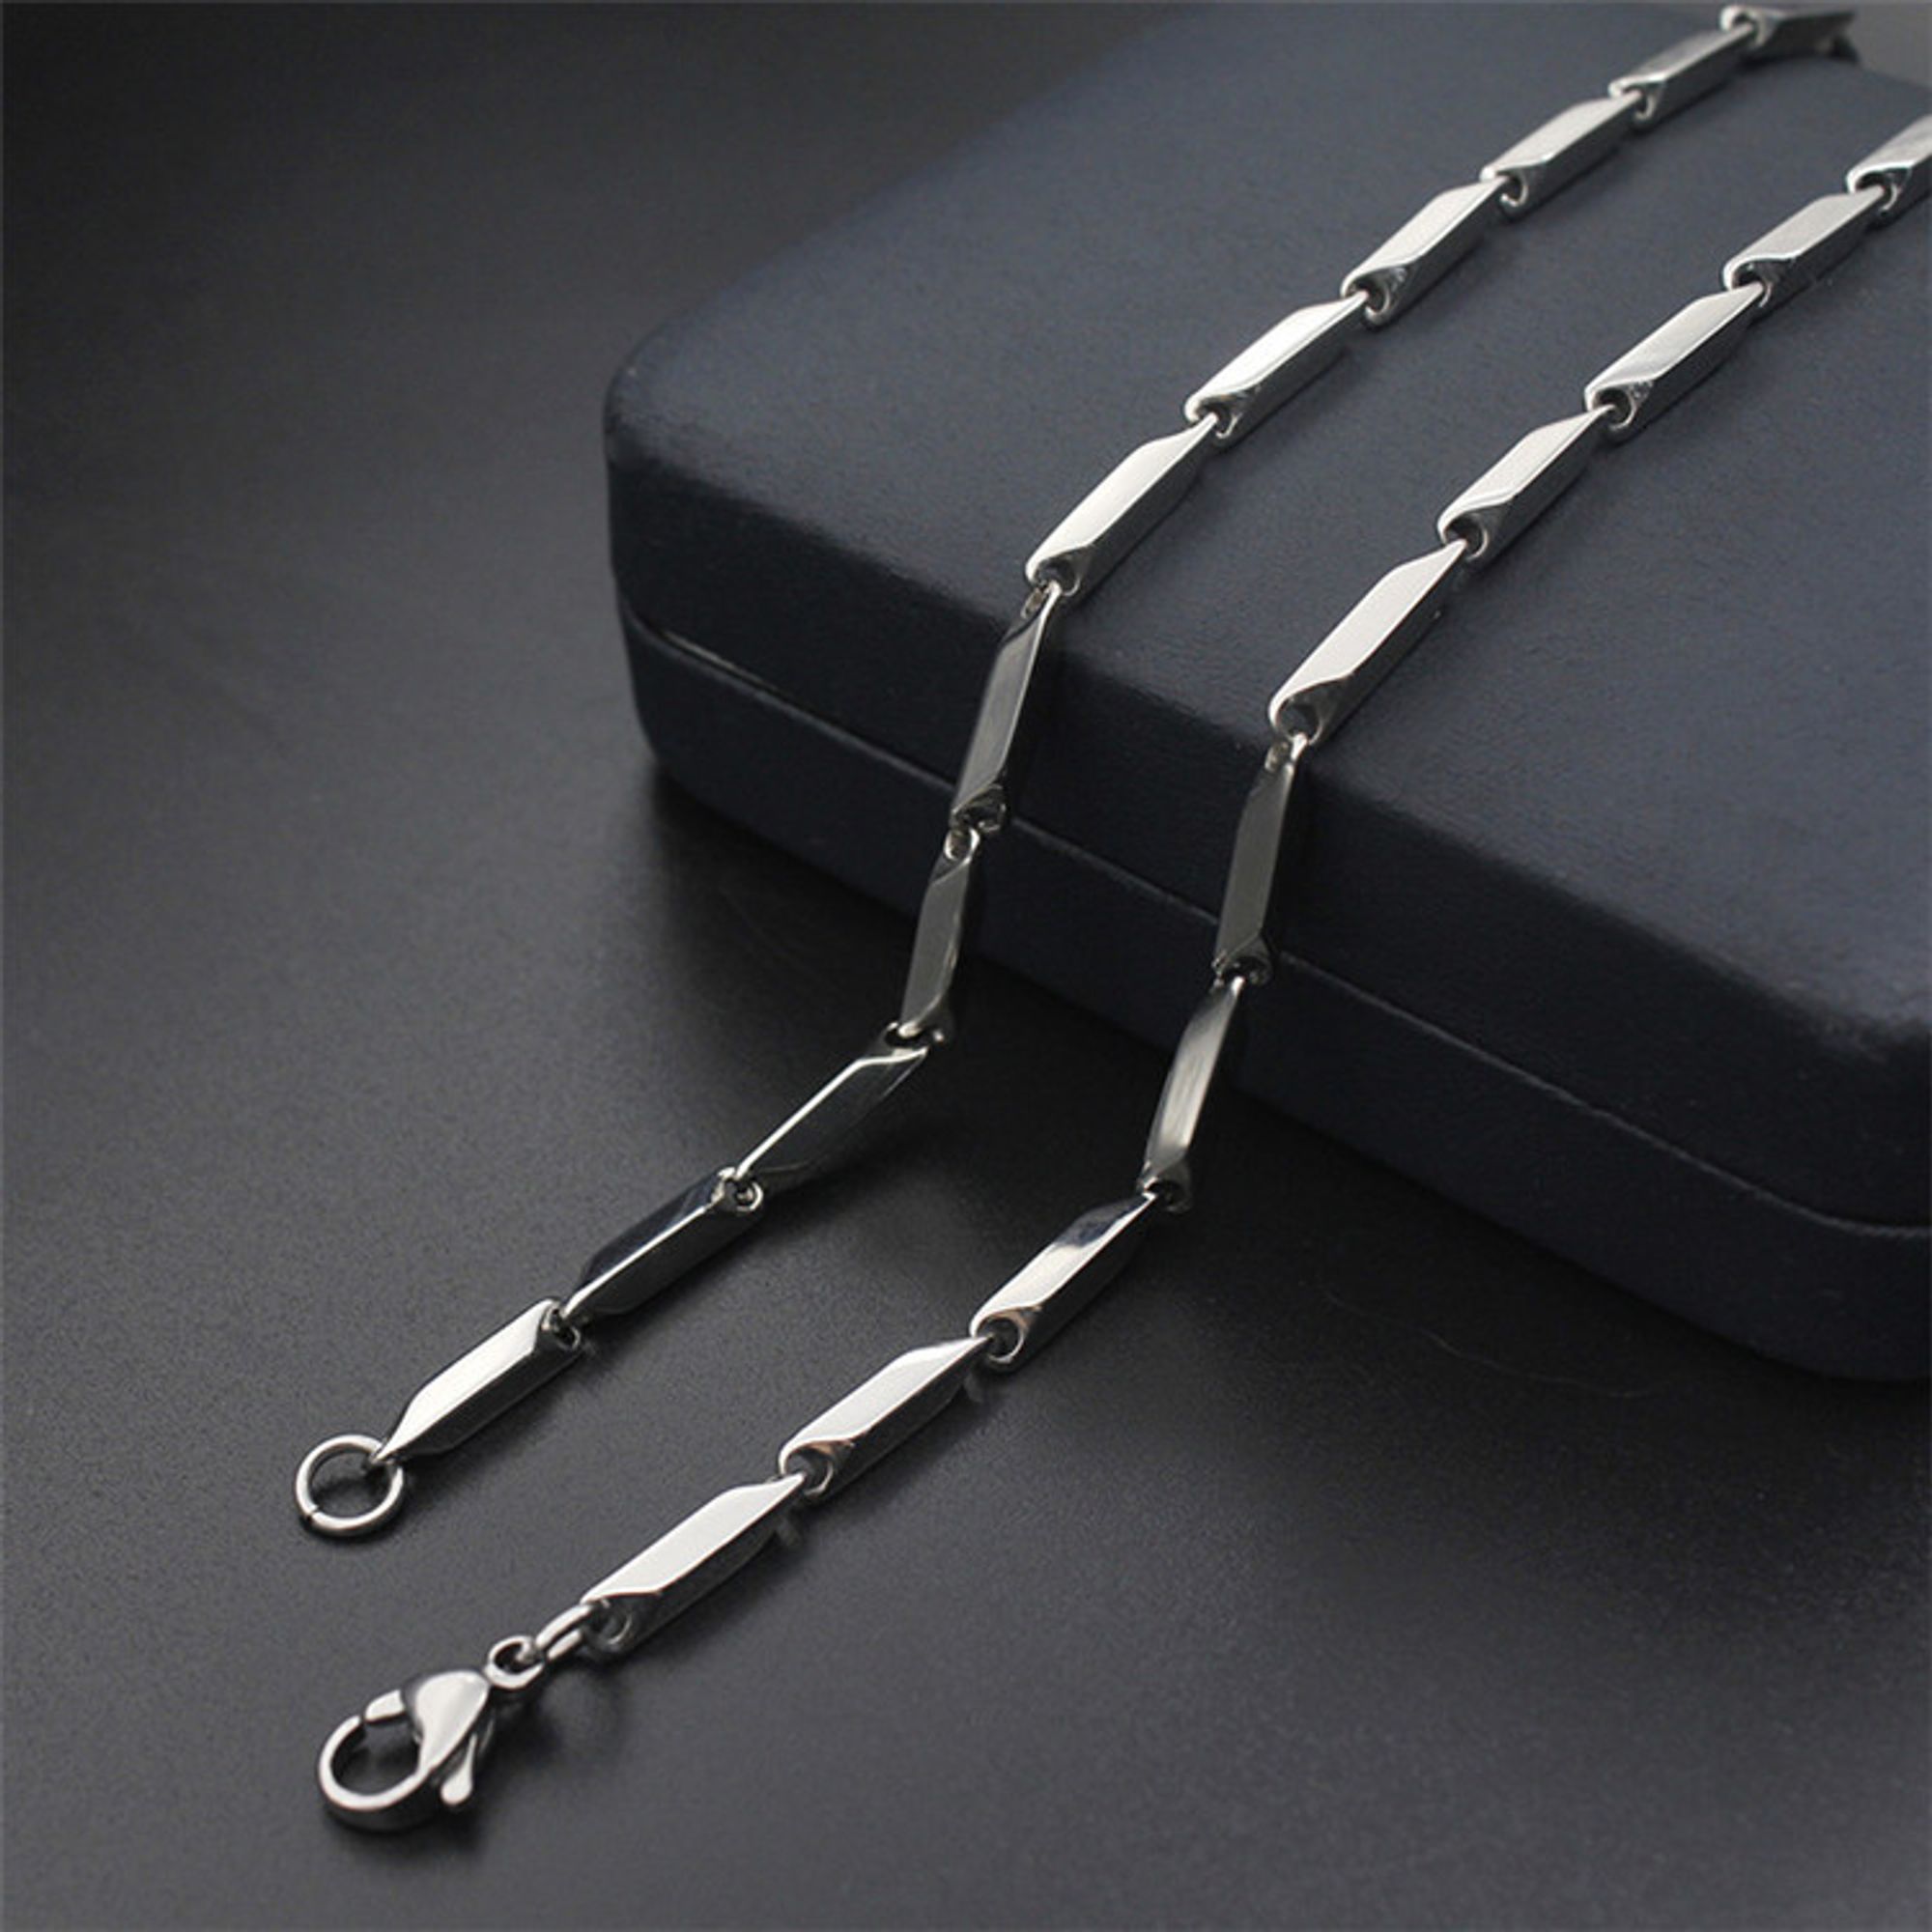 Buy Golden Chain for Men Rice Chain for Boys Classic Stainless Steel Golden  Rice Chain Necklace for Men and Boys. at